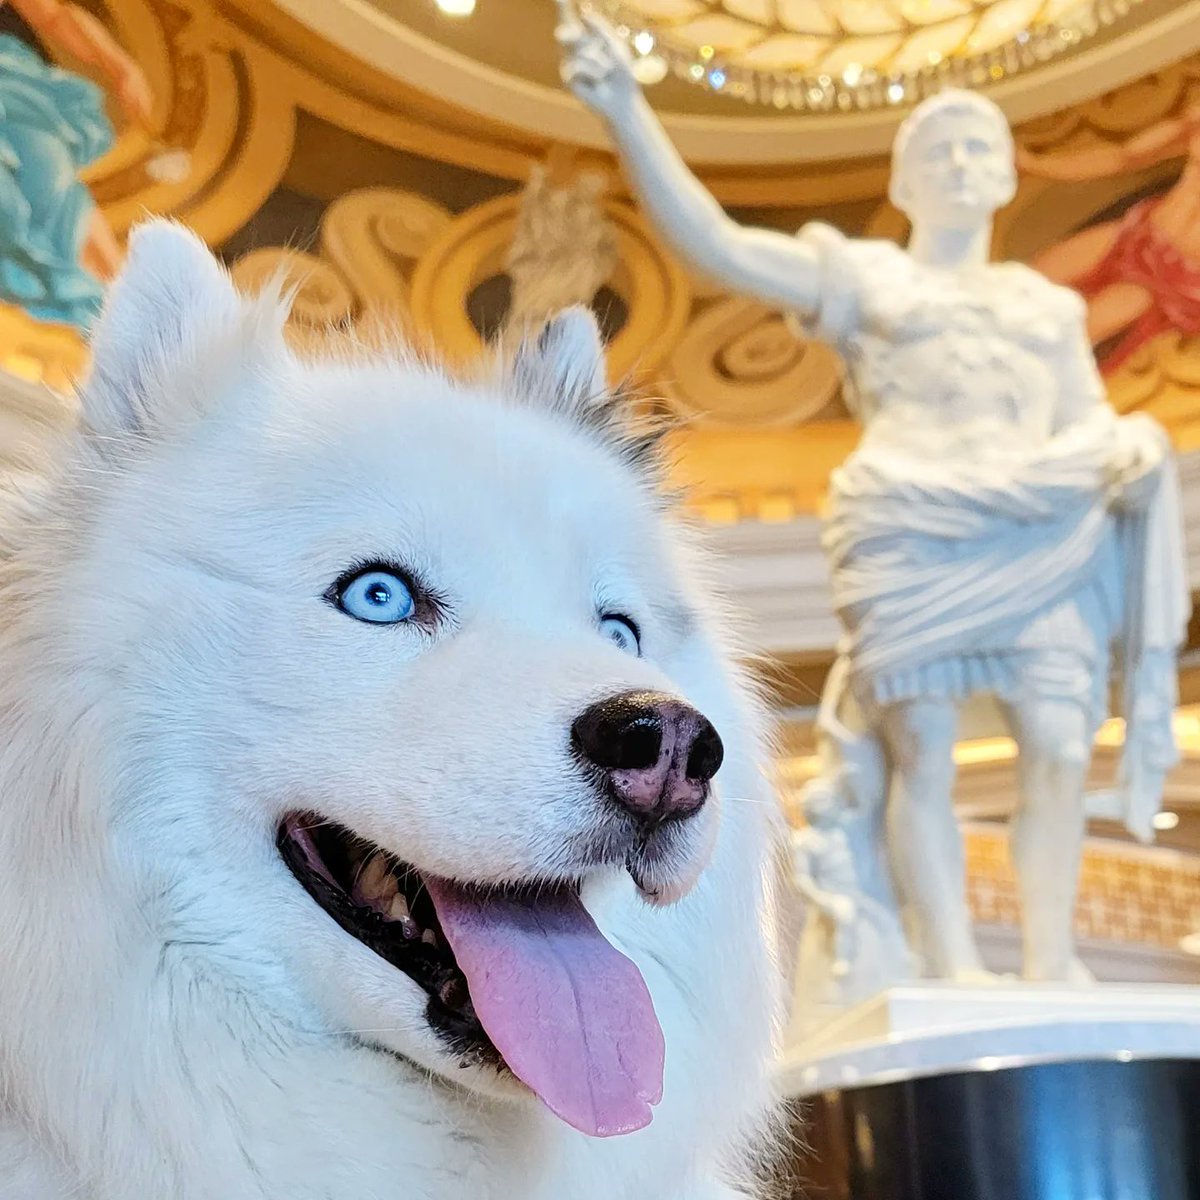 I wonder if @DominiqueAnsel could make a Dronut (Dog-Cronut) for the dog lovers at @CaesarsPalace?